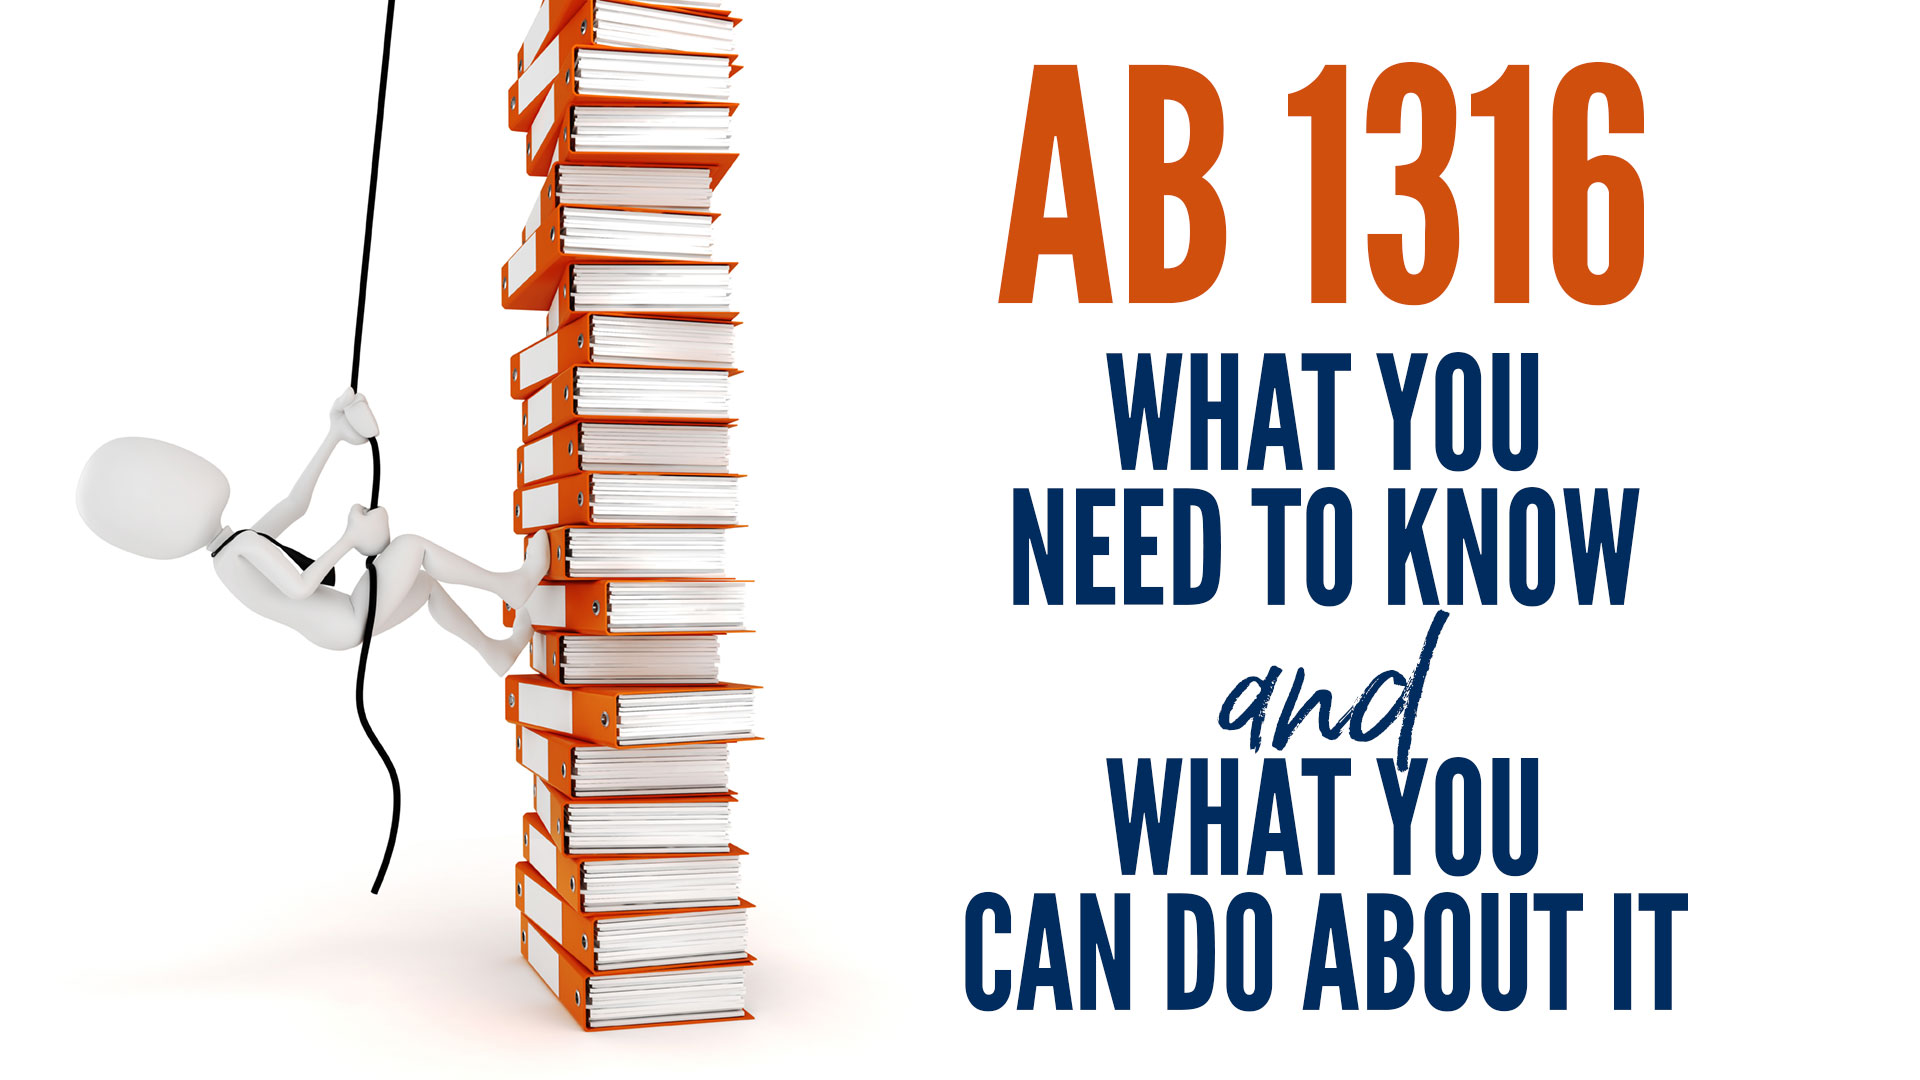 AB 1316 What You Need To Know and What You Can Do About It